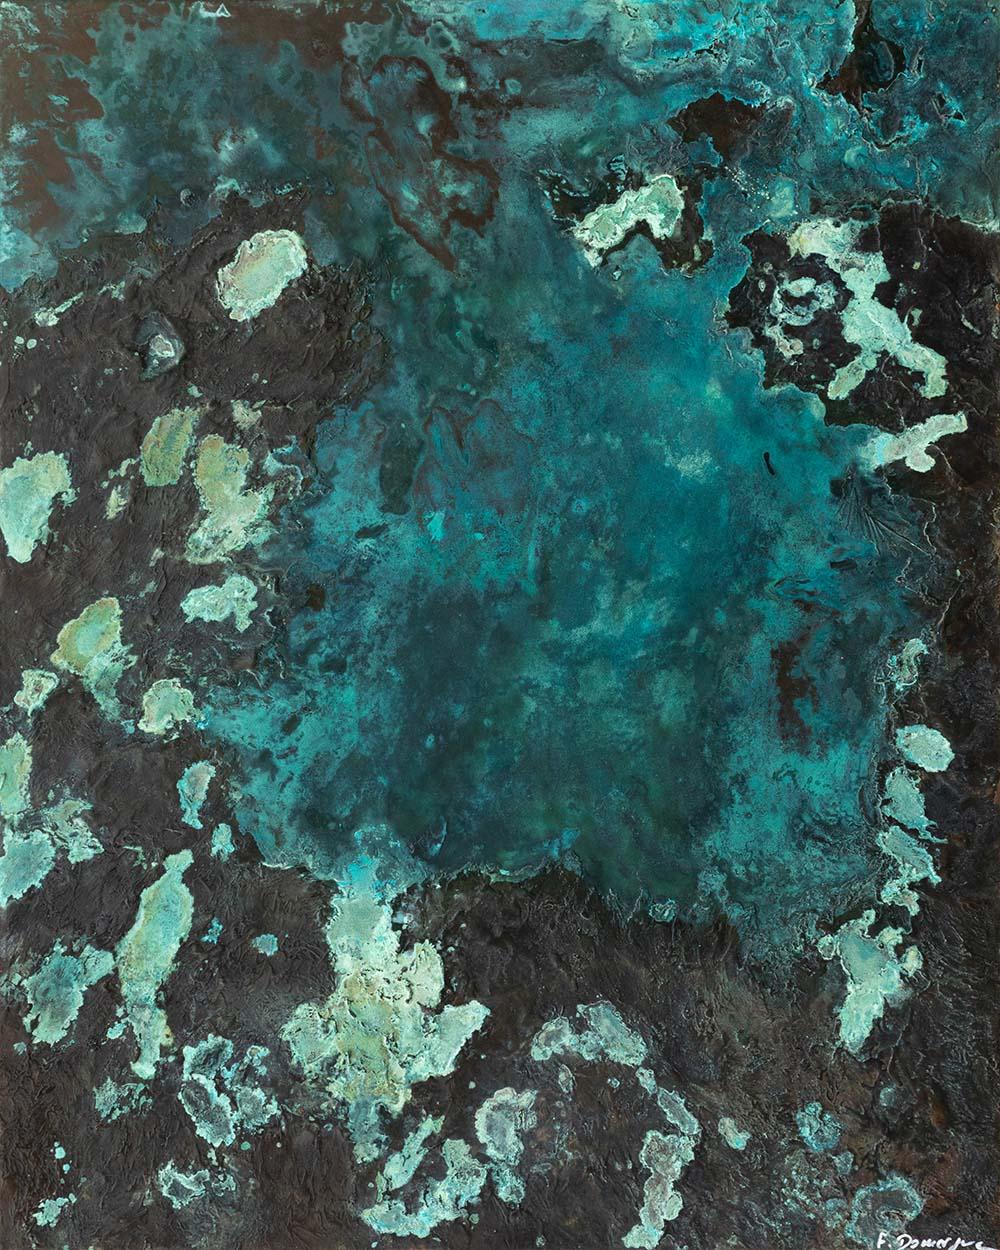 The Emerald Archipelago is a unique painting by French contemporary artist Frédérique Domergue. This painting is made with oxidized bronze leaves on aluminium panel, patina fixed with beeswax, dimensions are 100 × 80 cm (39.4 × 31.5 in).
The artwork